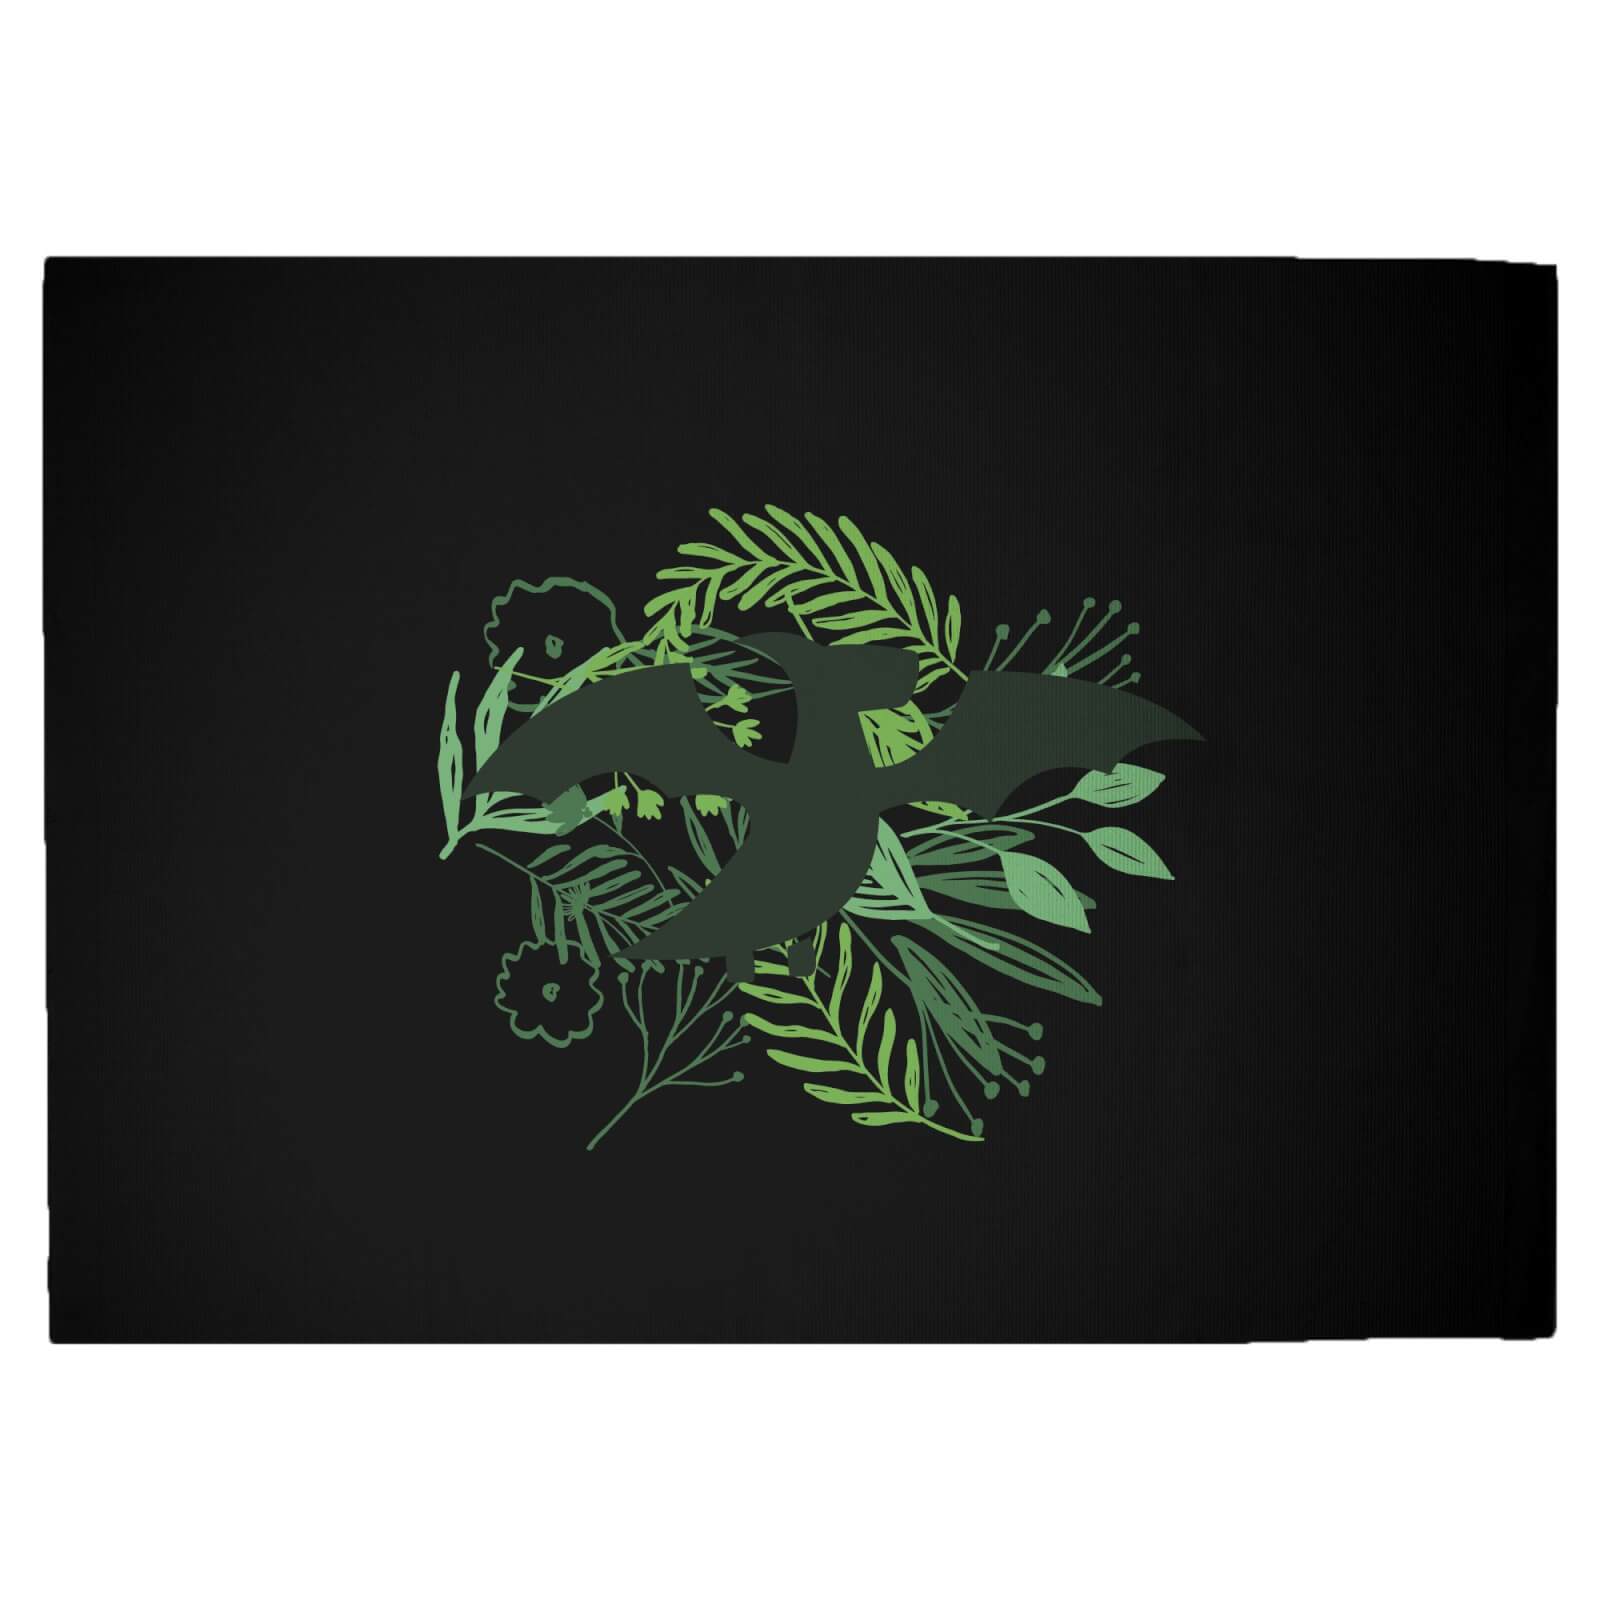 Pterodactyl Silhouette Foliage Woven Rug - Large